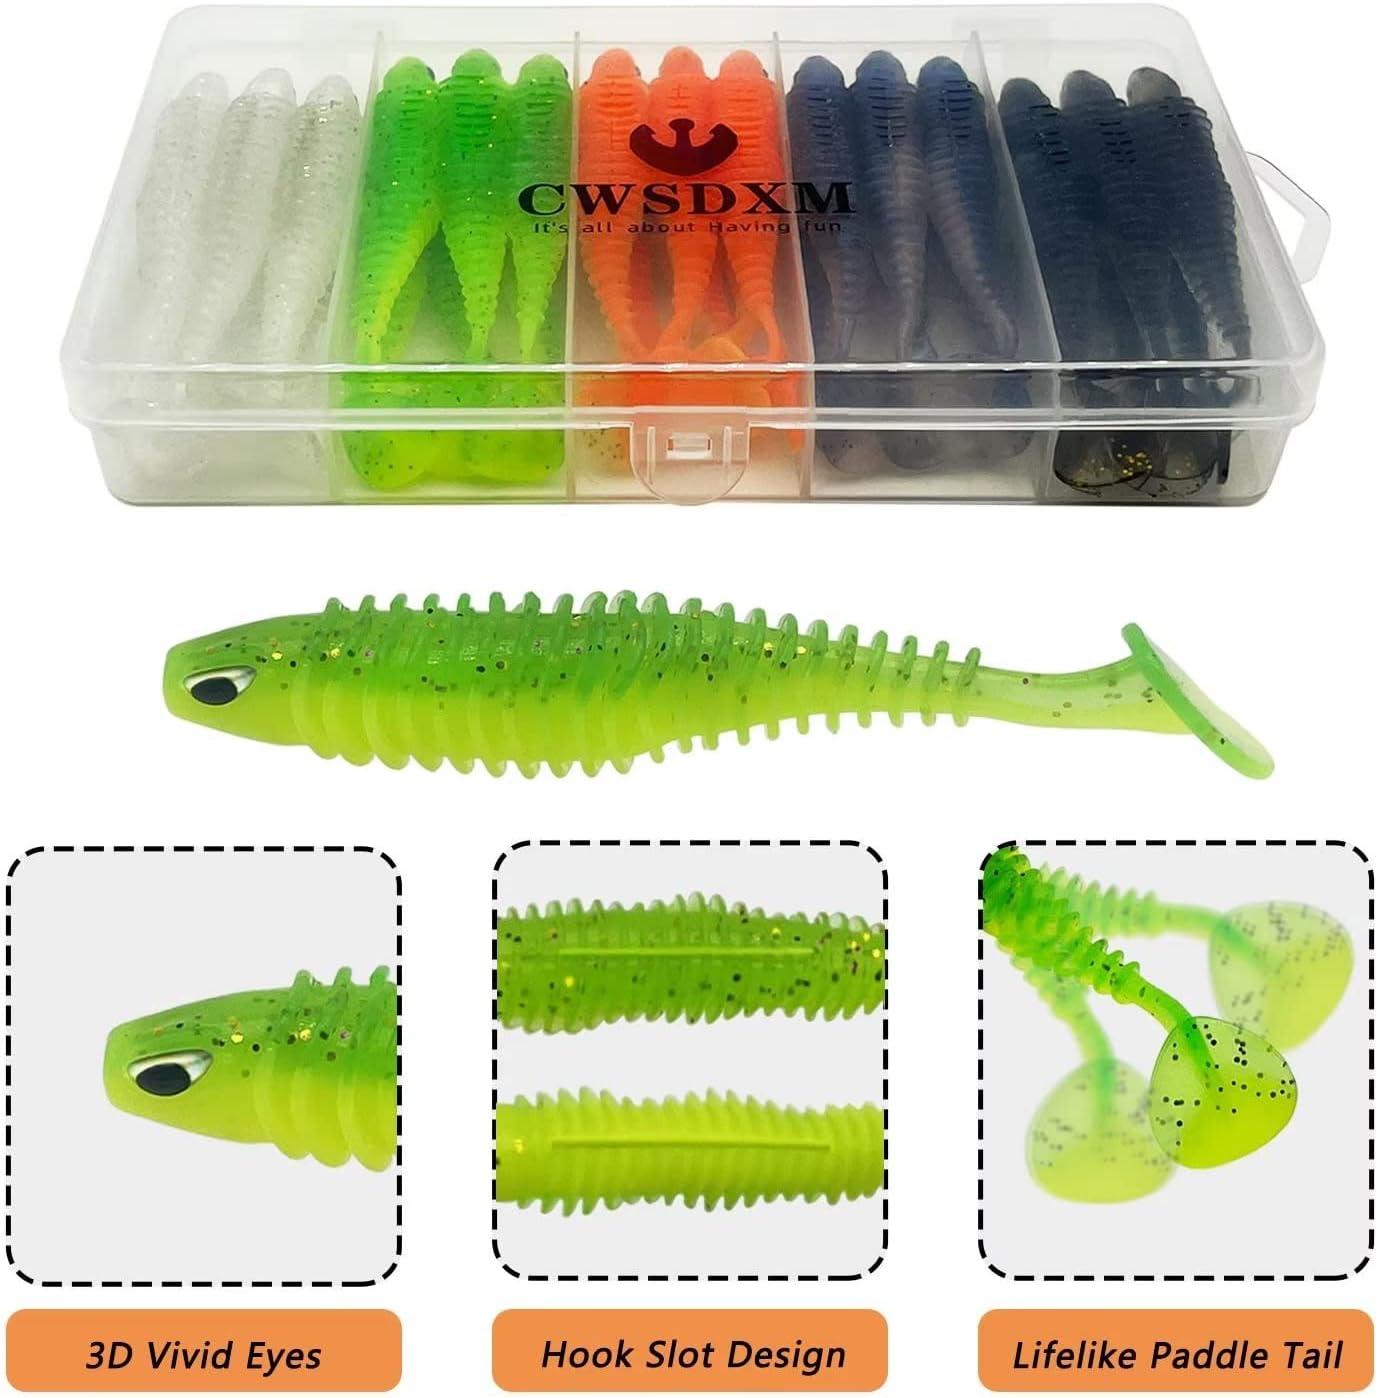  5/10 Pcs Lifelike Soft Paddle Tail Swimbaits Embedded with  Lead jigs Set,as Sinking Fishing jigs Lures in Various Saltwater and  Freshwater for Crappie Trout Pike Bass (5 Pcs) : Sports